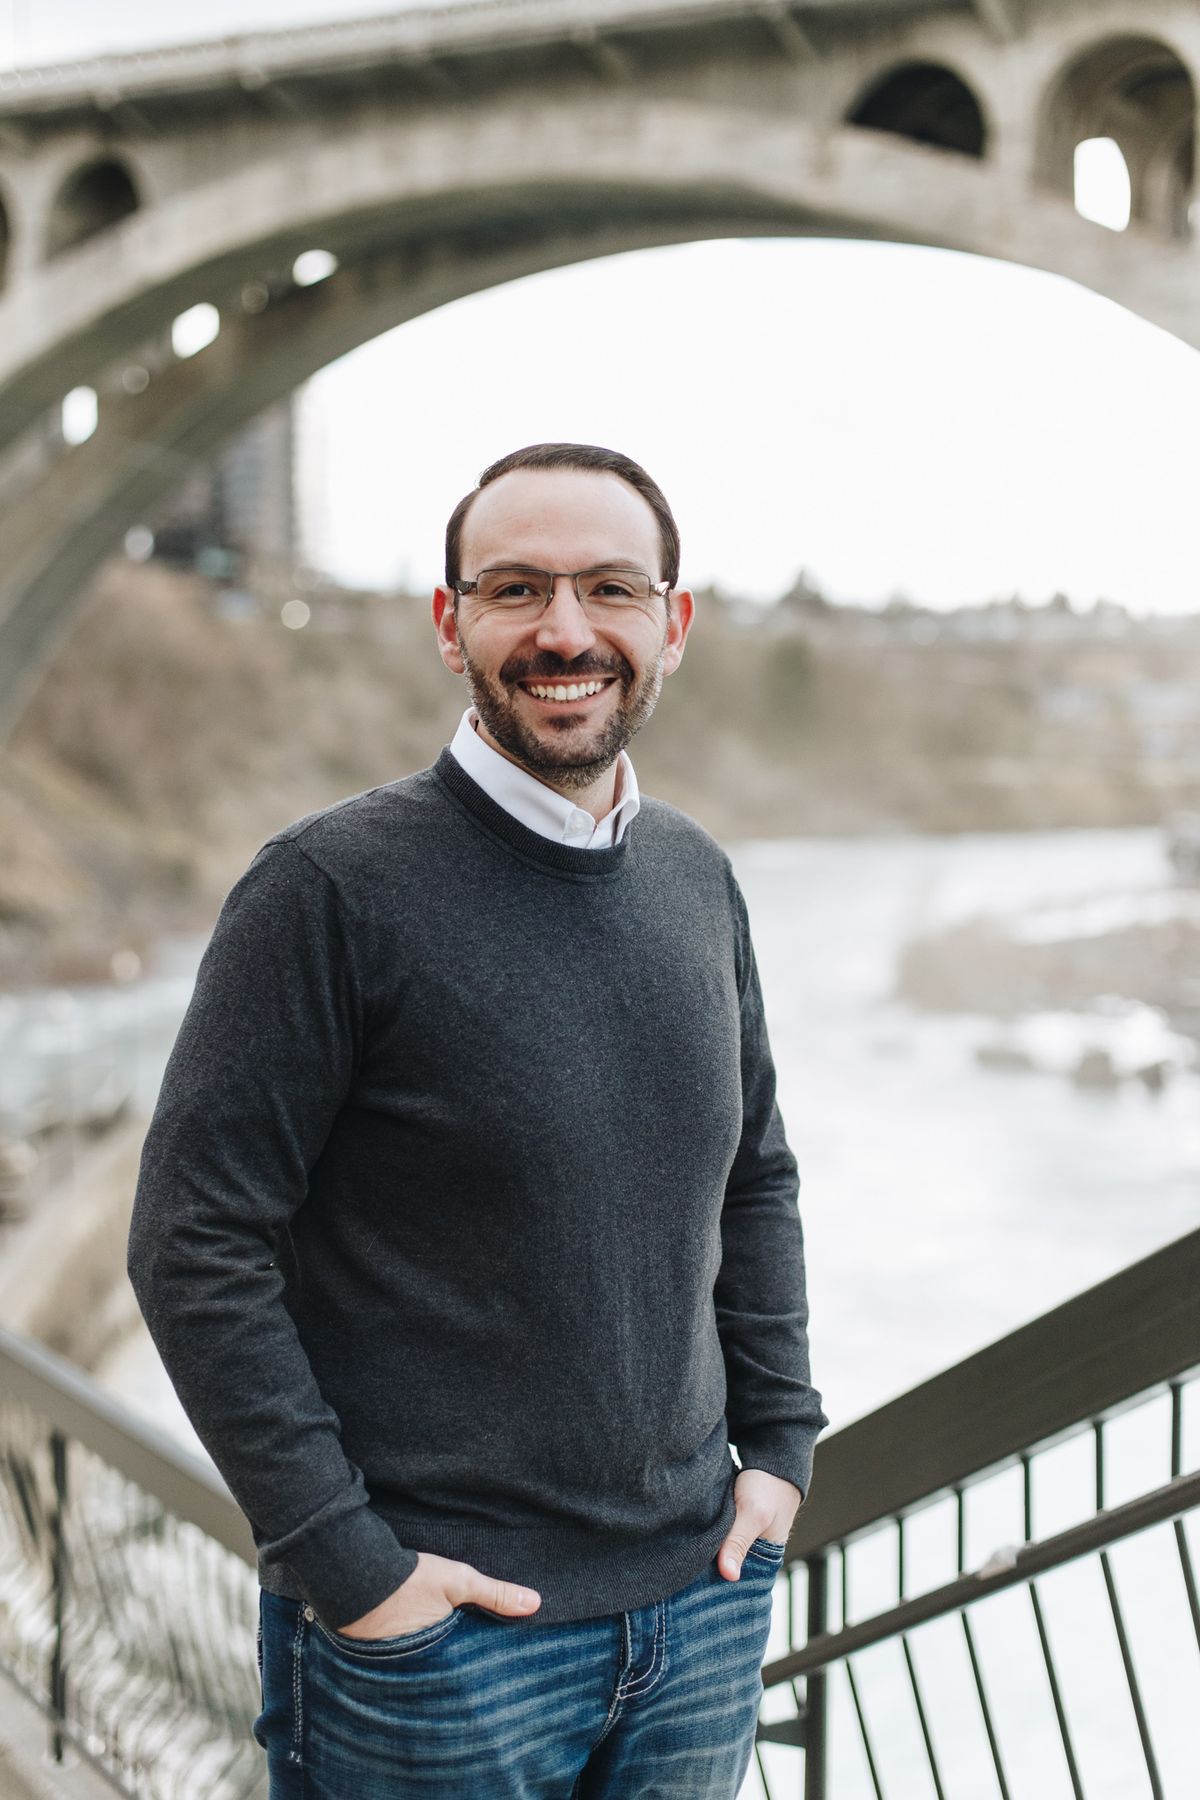 Michael Cathcart is running for re-election to continue representing northeast Spokane on the Spokane City Council in the November 2023 election.  (Courtesy of Michael Cathcart)